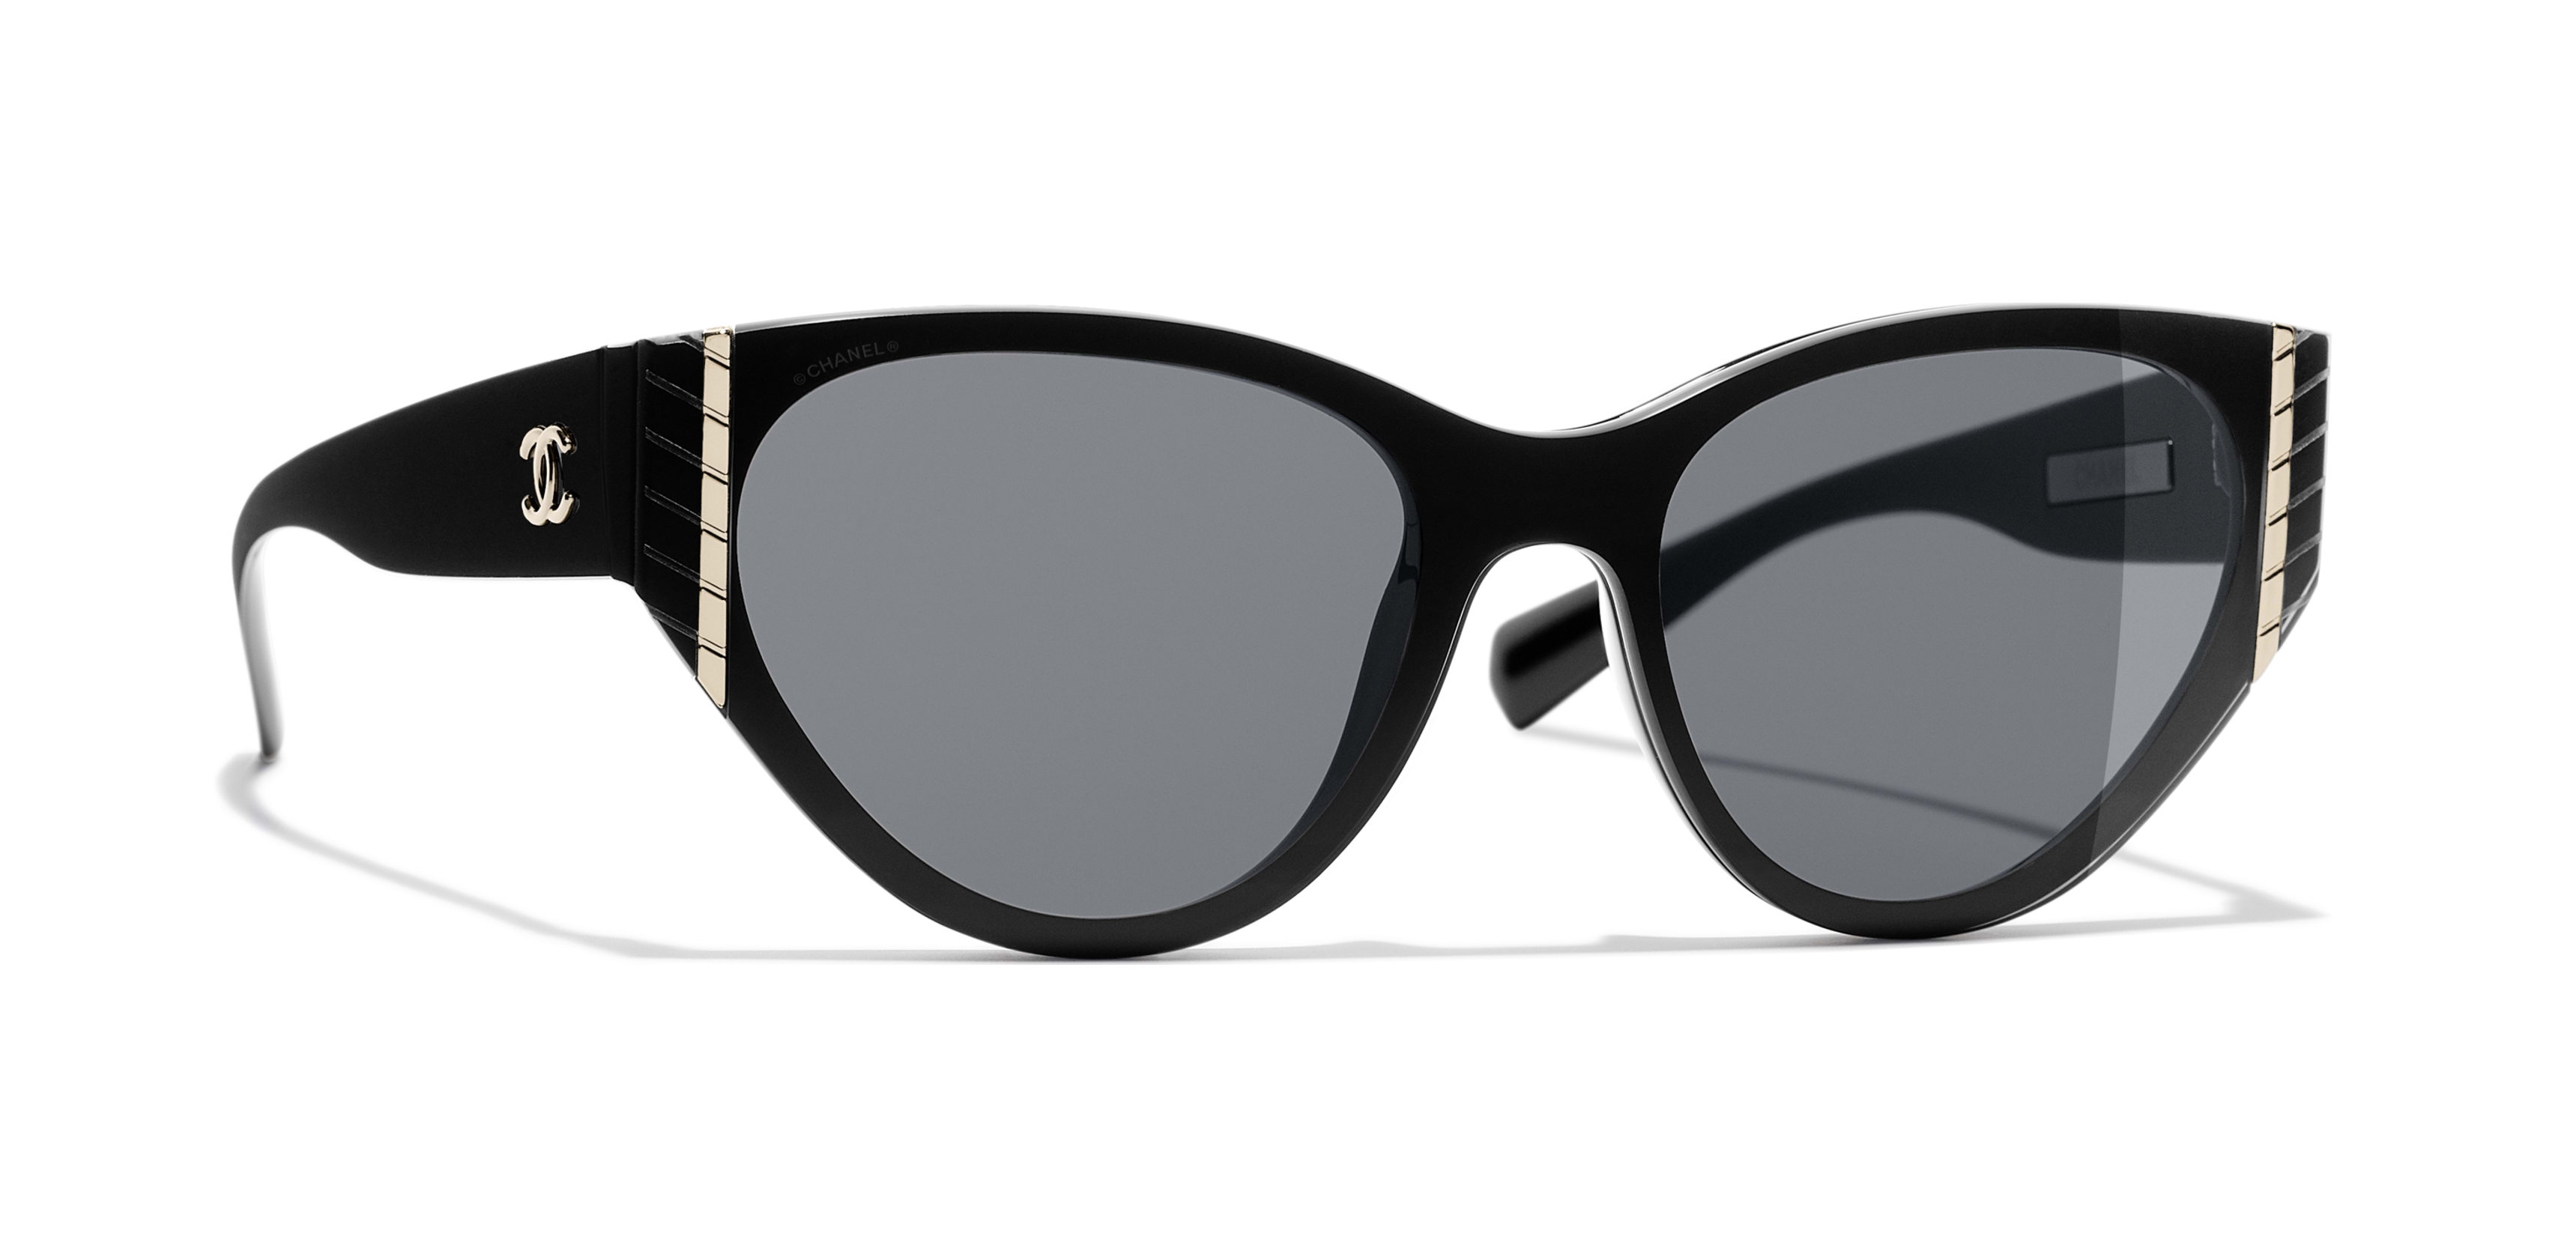 Cat Eye Sunglasses  Retro Glam From Chanel Sunglasses to Cheap  Cheerful   Glamour and Gains